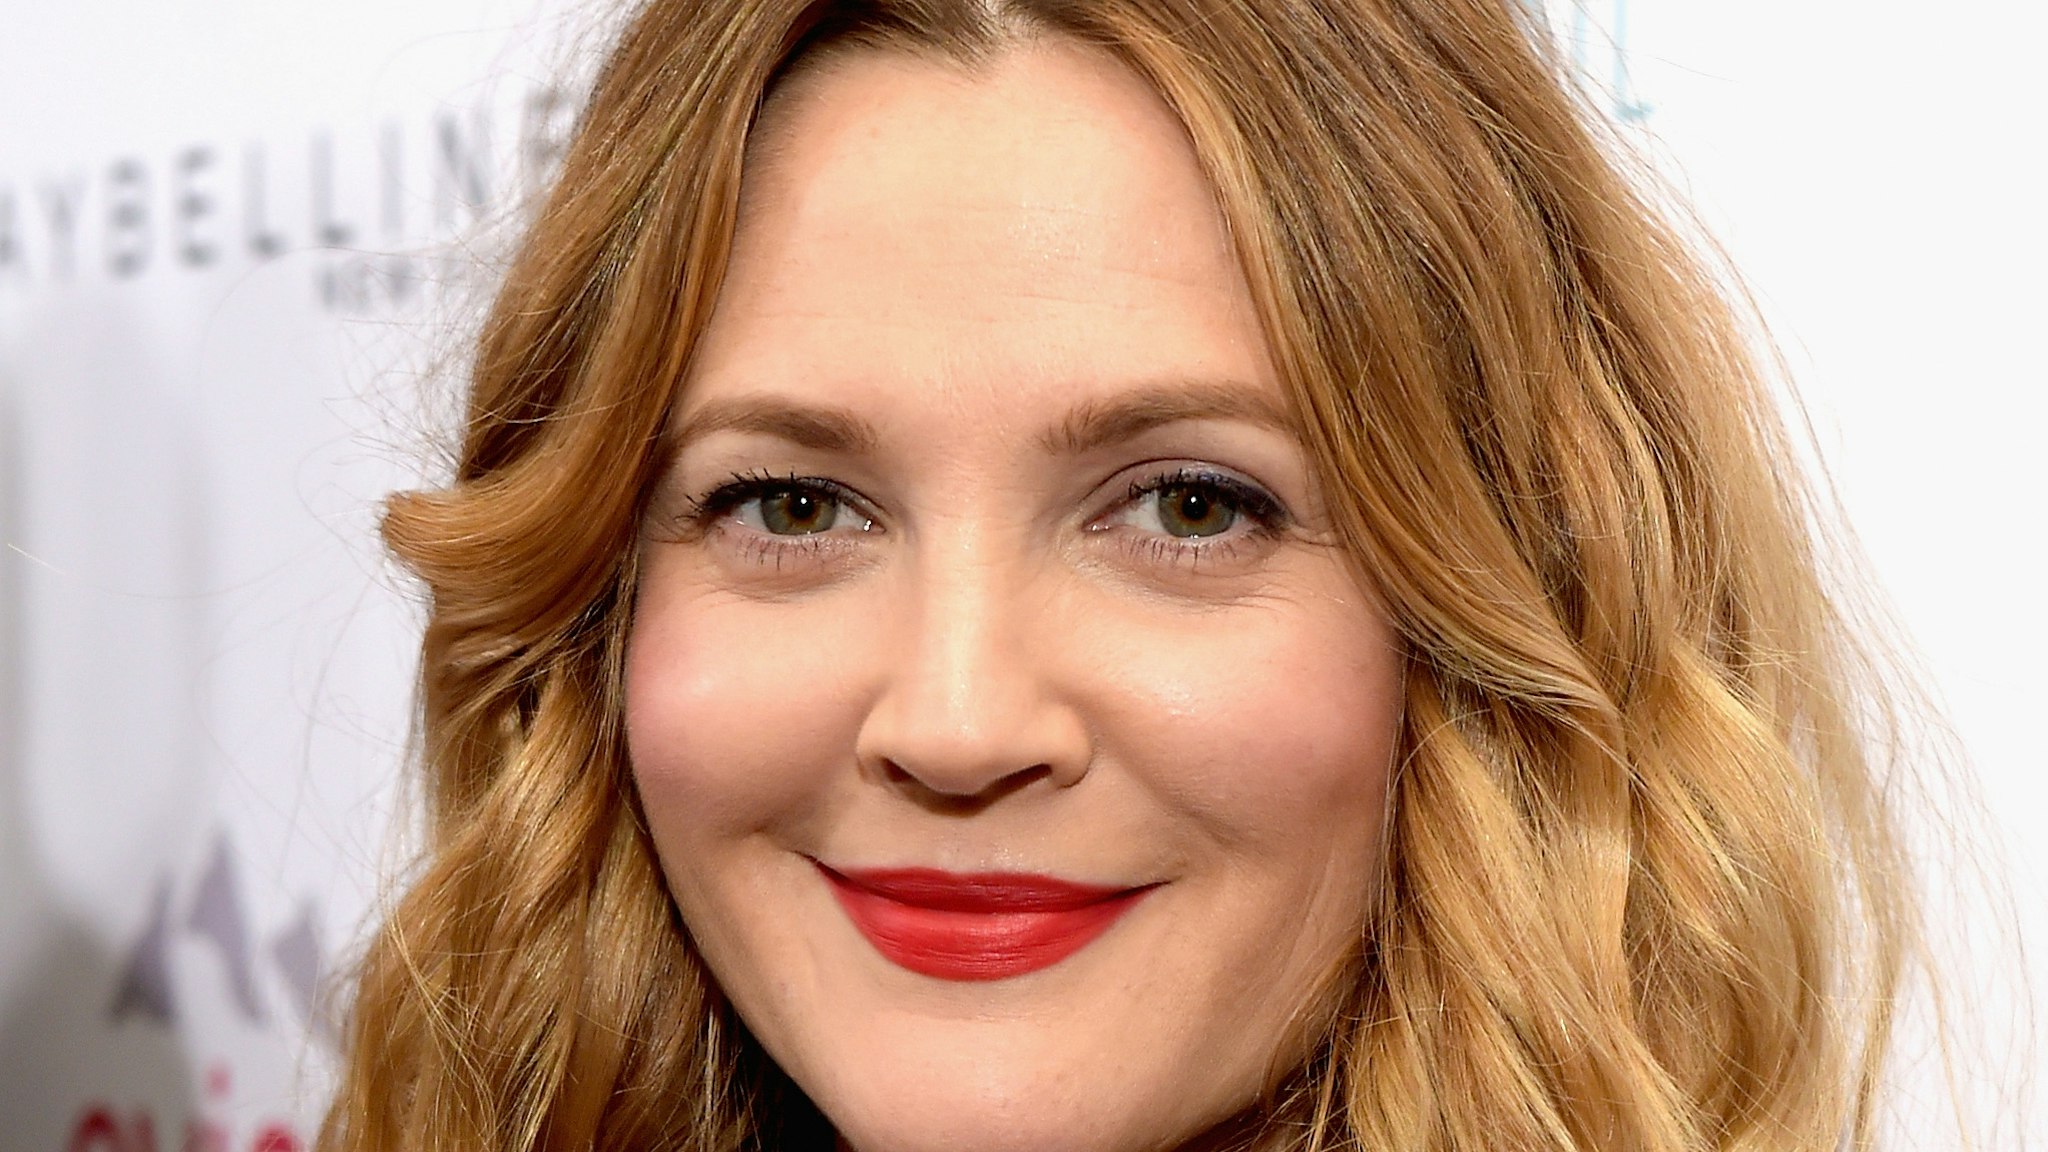 Actress Drew Barrymore attends The DAILY FRONT ROW "Fashion Los Angeles Awards" Show at Sunset Tower on January 22, 2015 in West Hollywood, California. (